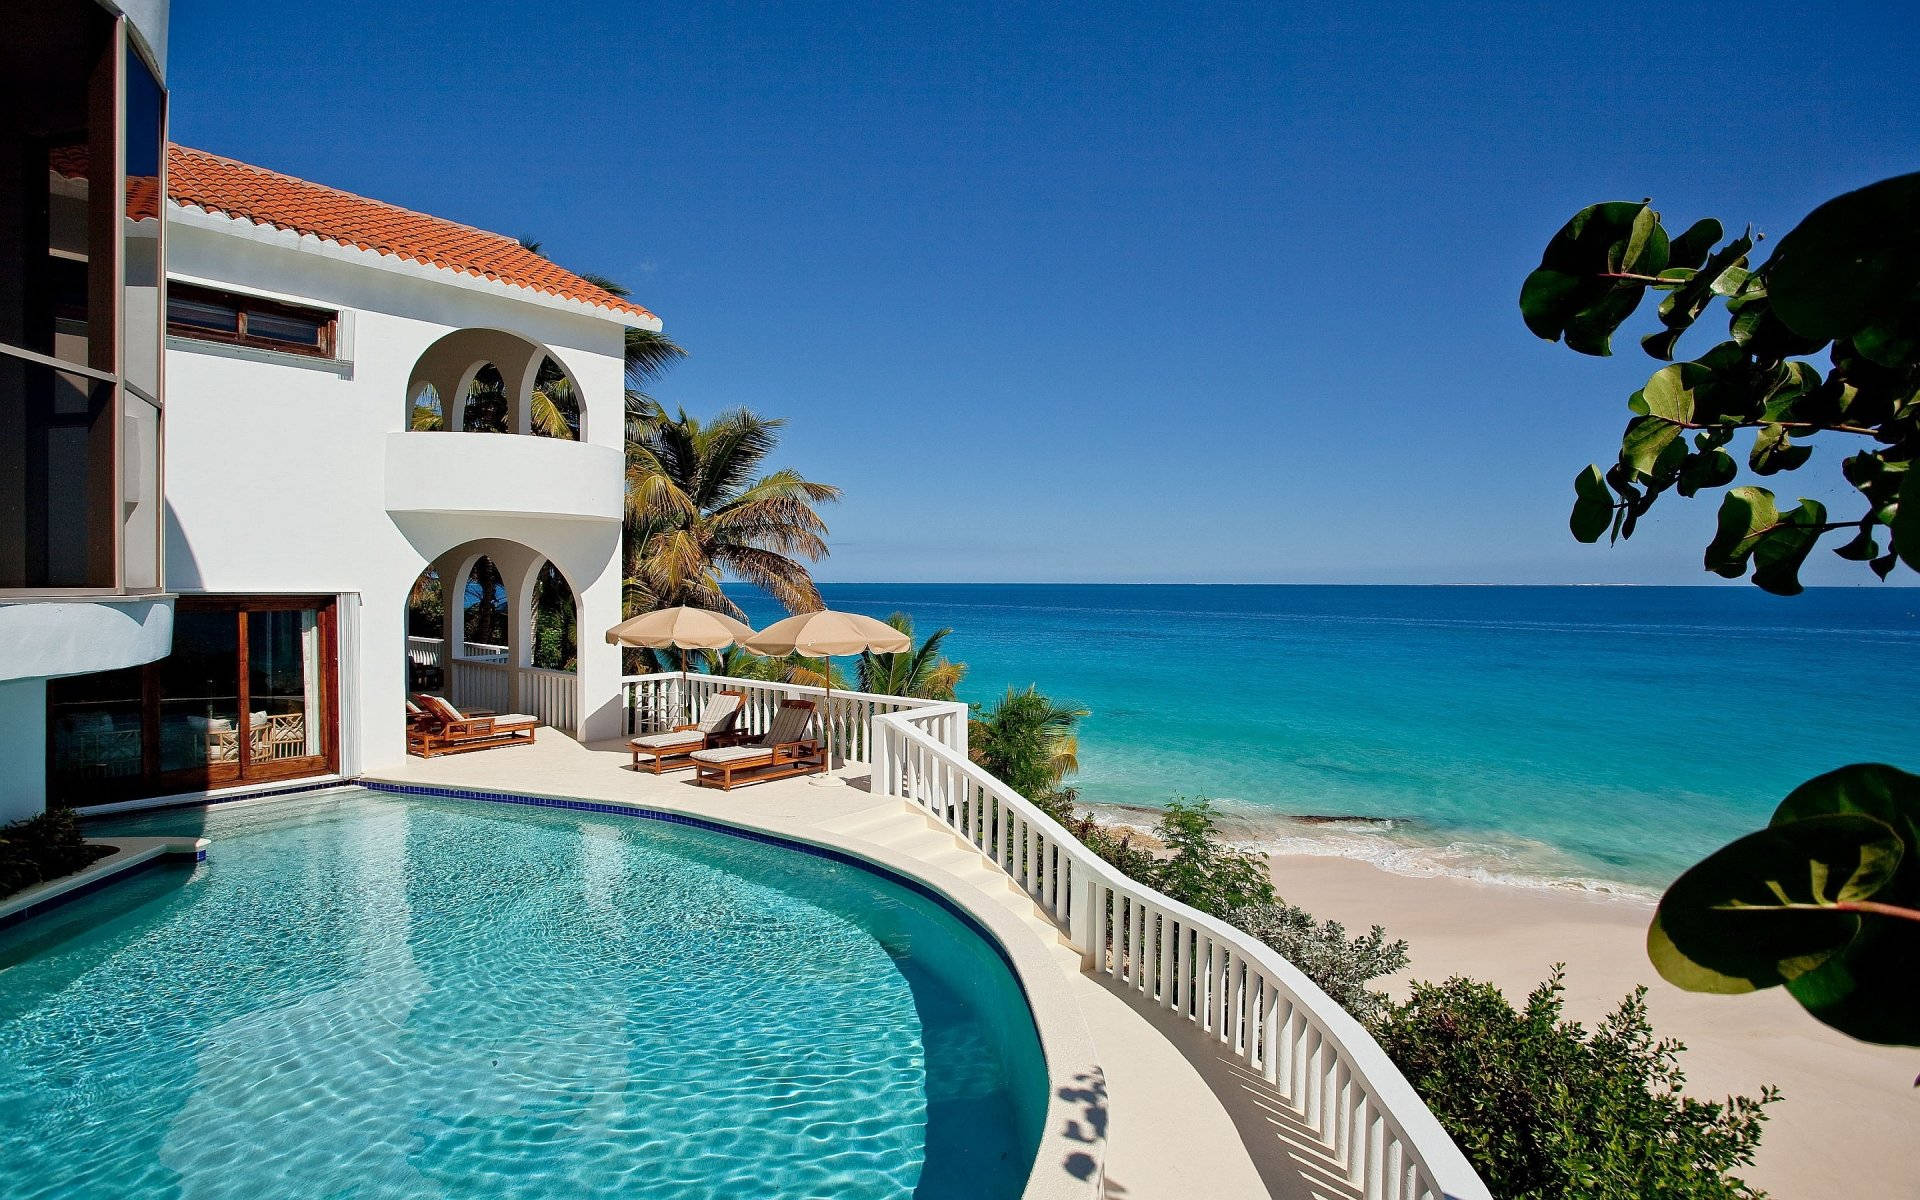 Tranquil Beach House in Anguilla, Caribbean Wallpaper